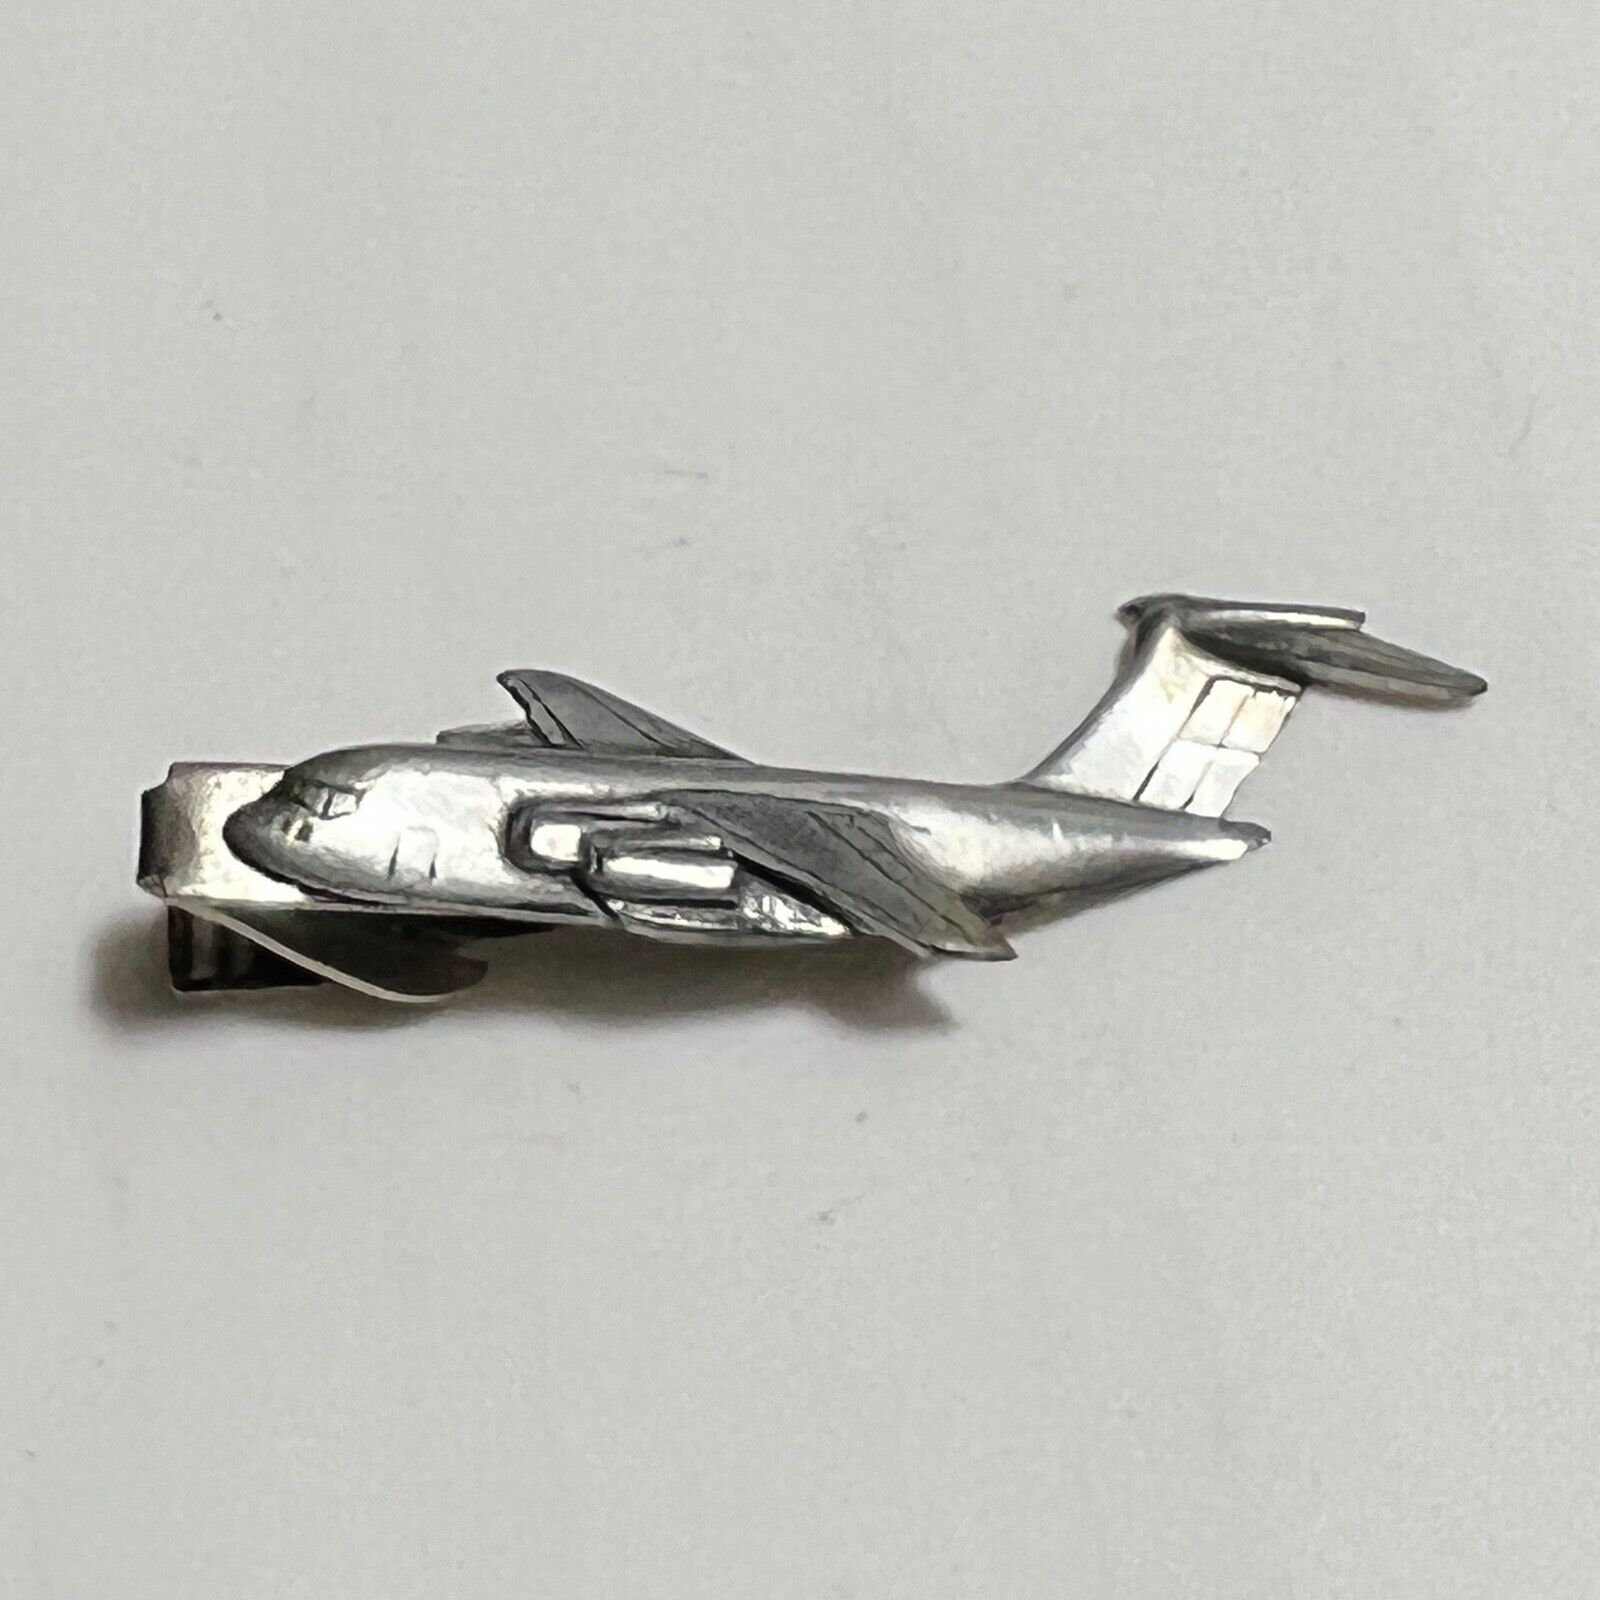 VINTAGE JET AIRPLANE METAL COLLECTIBLE RARE US MILITARY? NIPPY CLIP TIE CLIP